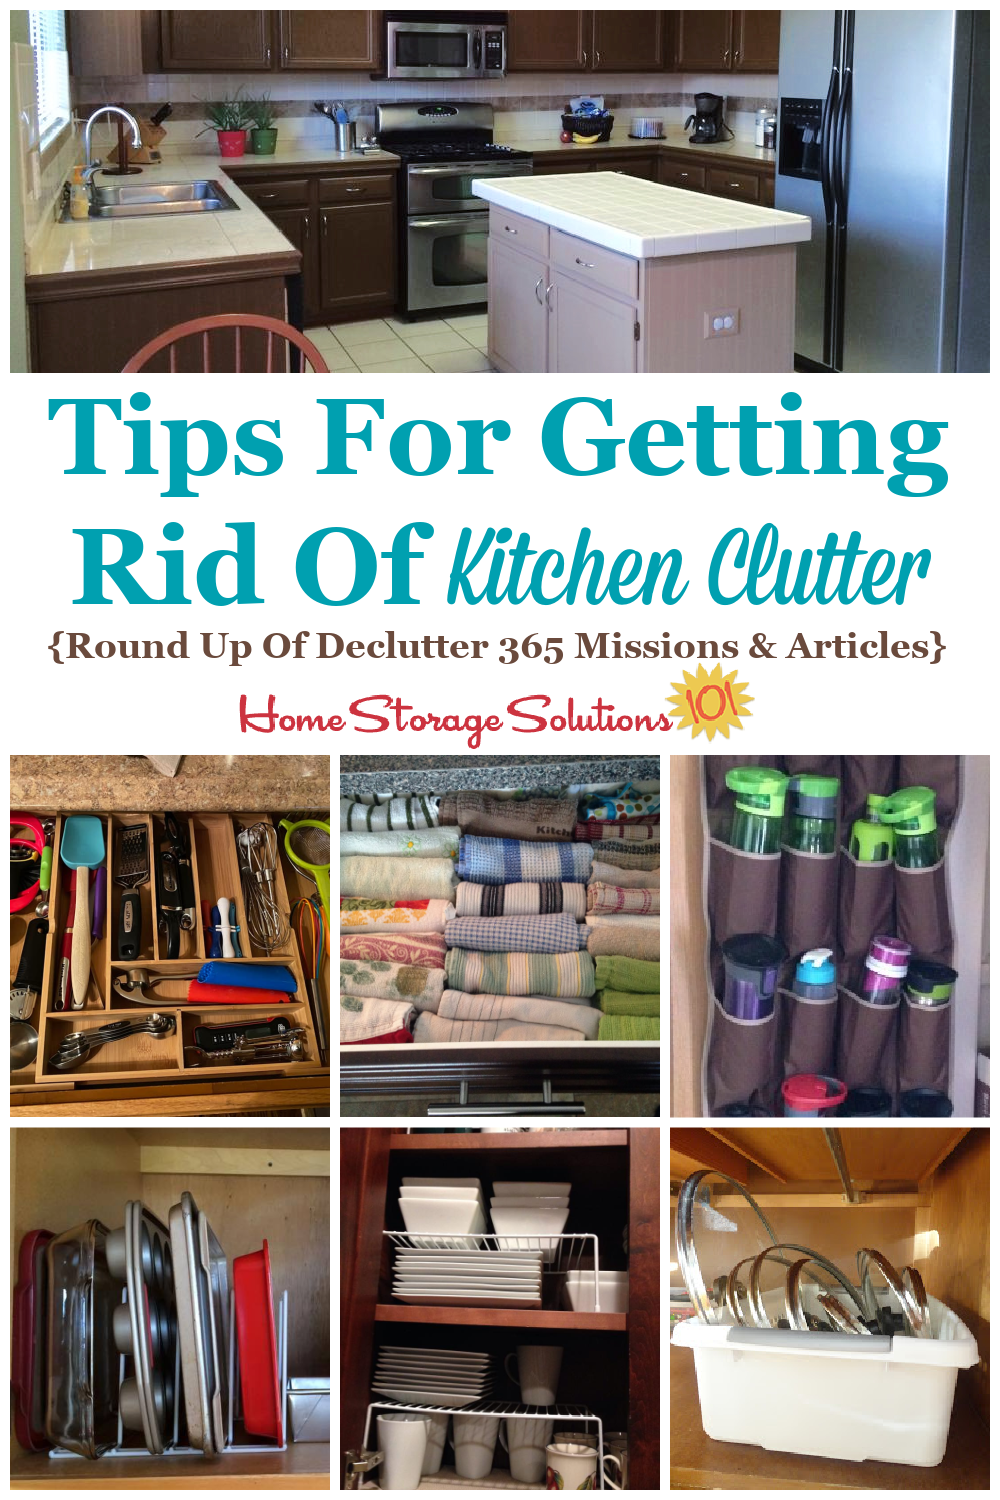 Here is a checklist of kitchen clutter items to consider getting rid of, plus a round up of Declutter 365 missions and articles to help you accomplish these tasks {on Home Storage Solutions 101} #Declutter365 #KitchenClutter #DeclutterKitchen